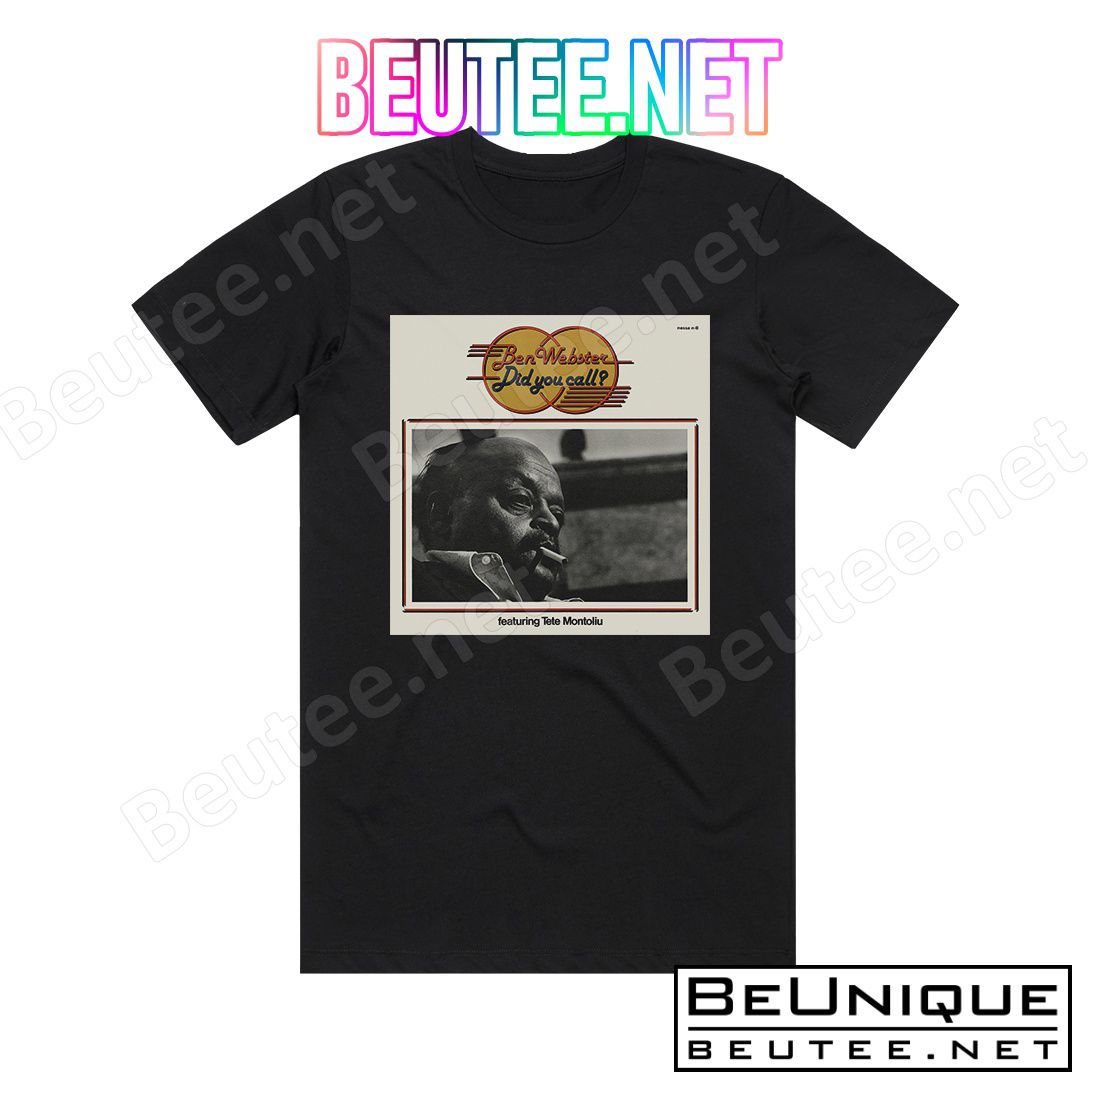 Ben Webster Did You Call Album Cover T-Shirt